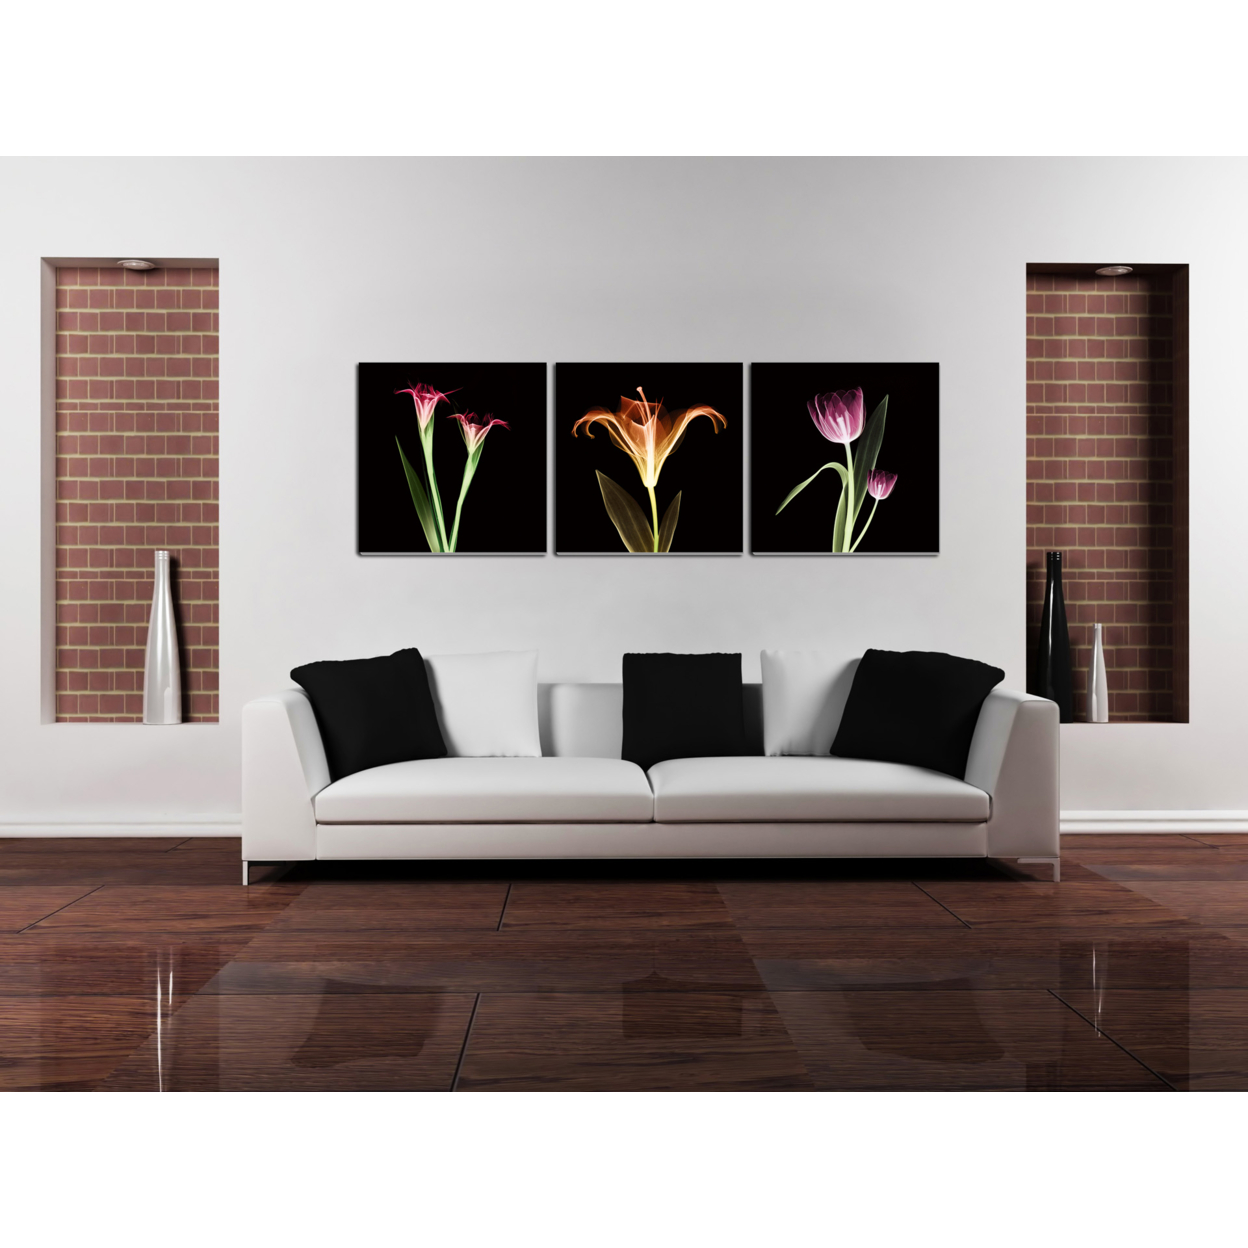 Tropical 3 Piece Wrapped Canvas Wall Art Print 16x48 Inches